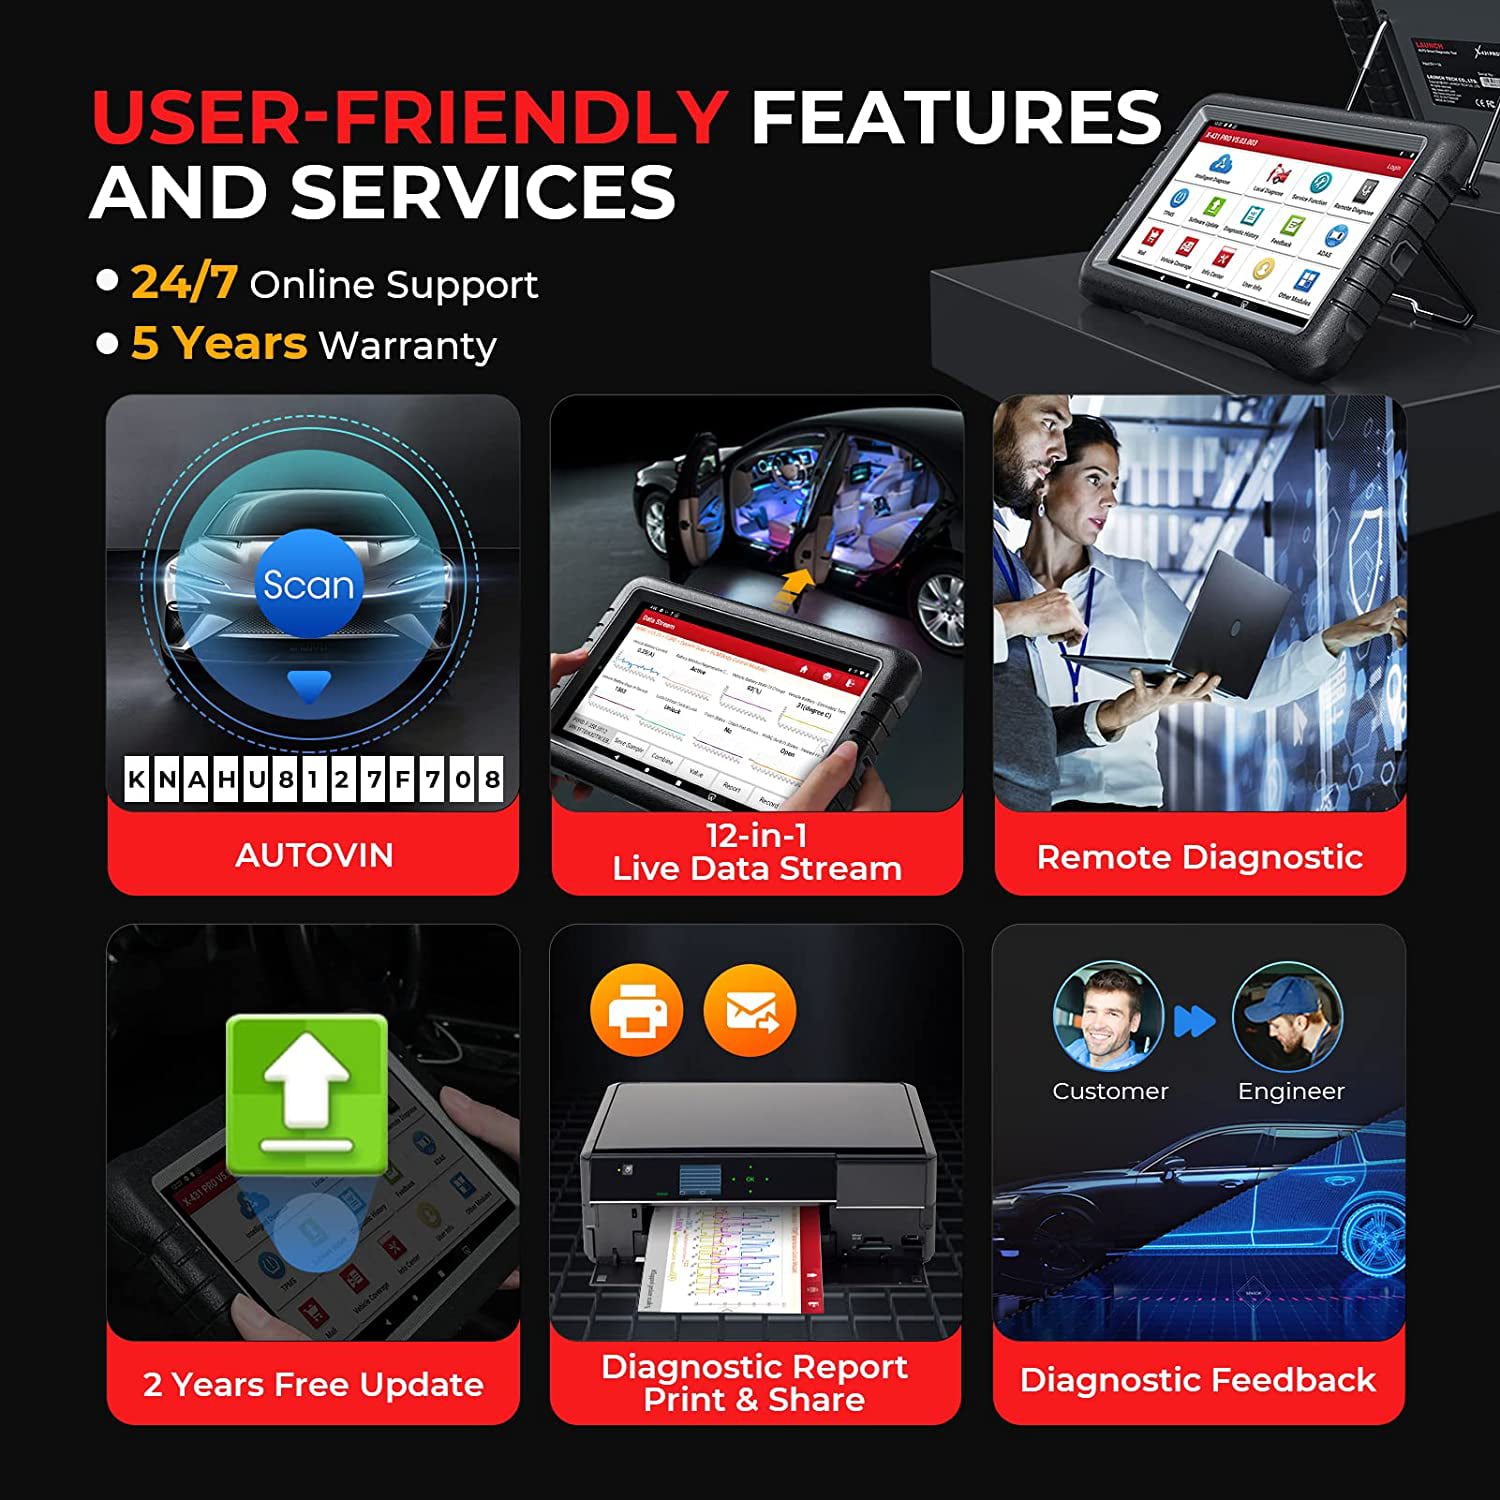 LAUNCH Scanner X431 PROS V+ Auto Diagnostic Scan Tool Key